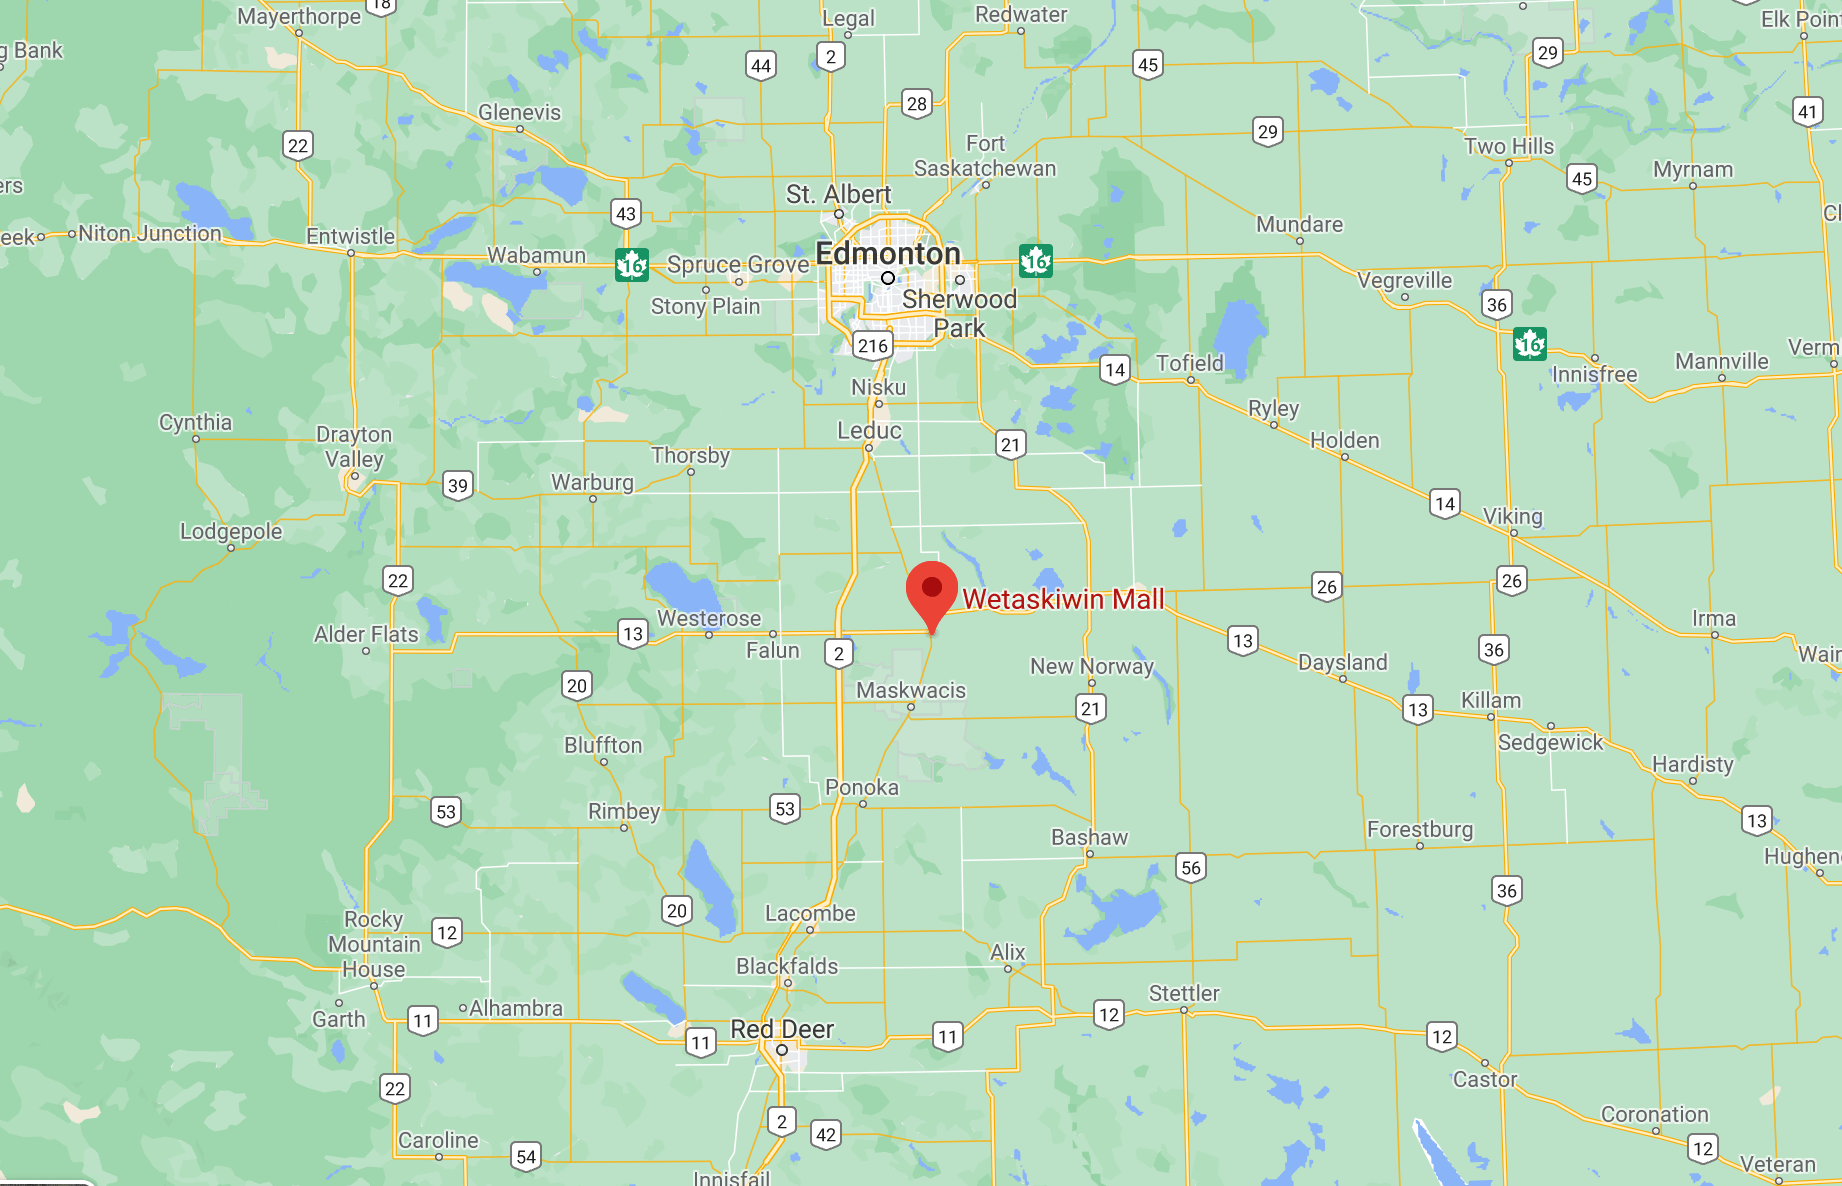 Google Map of Wetaskiwin Mall and surrounding area